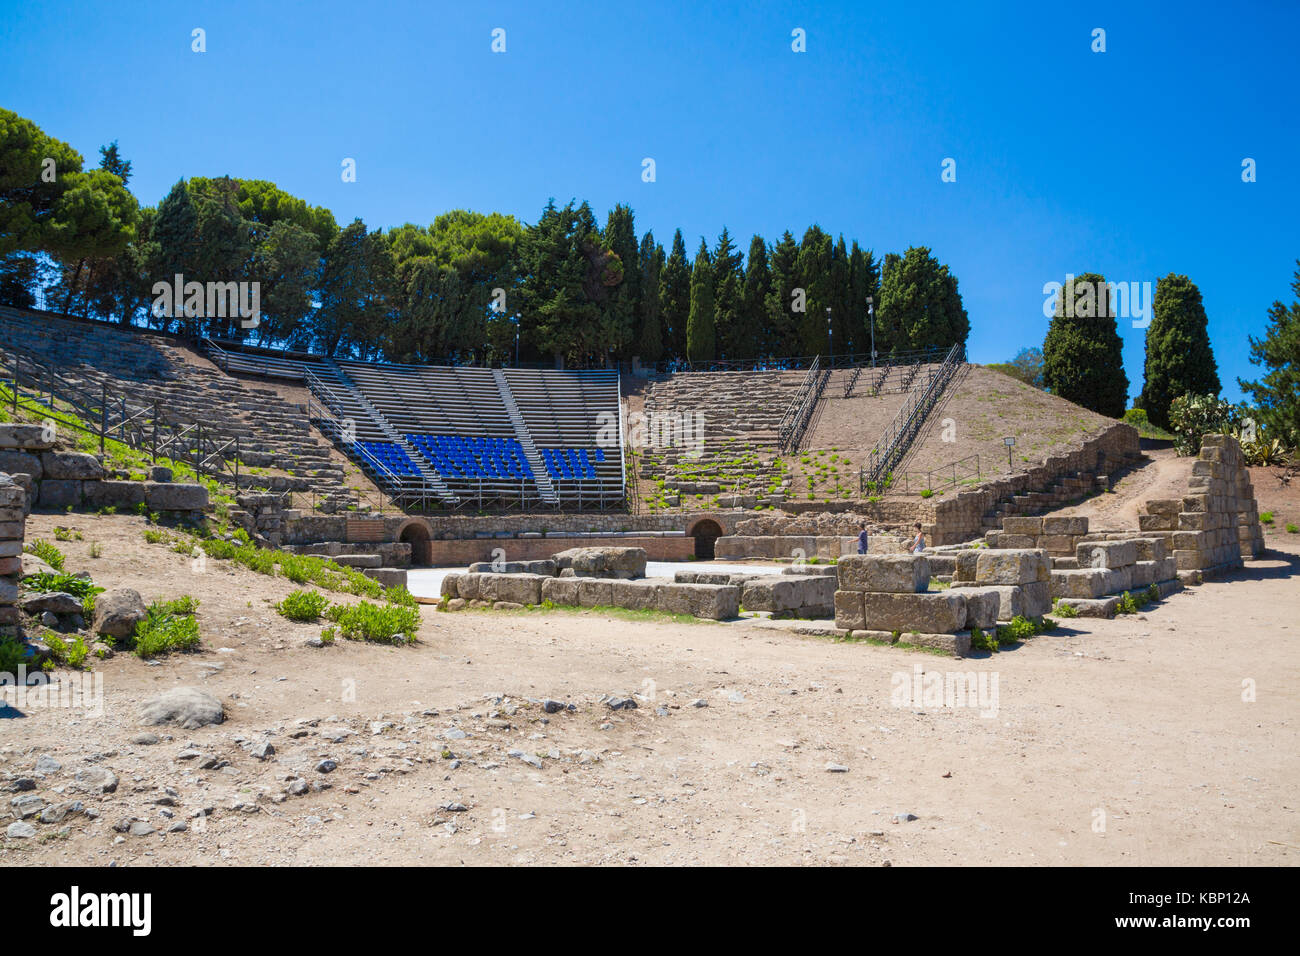 Tindari (Sicily, Italy) - Archaeological area of Tindari, the ancient greek polis founded in 396 BC by Dionysius of Syracuse. The theatre. Stock Photo